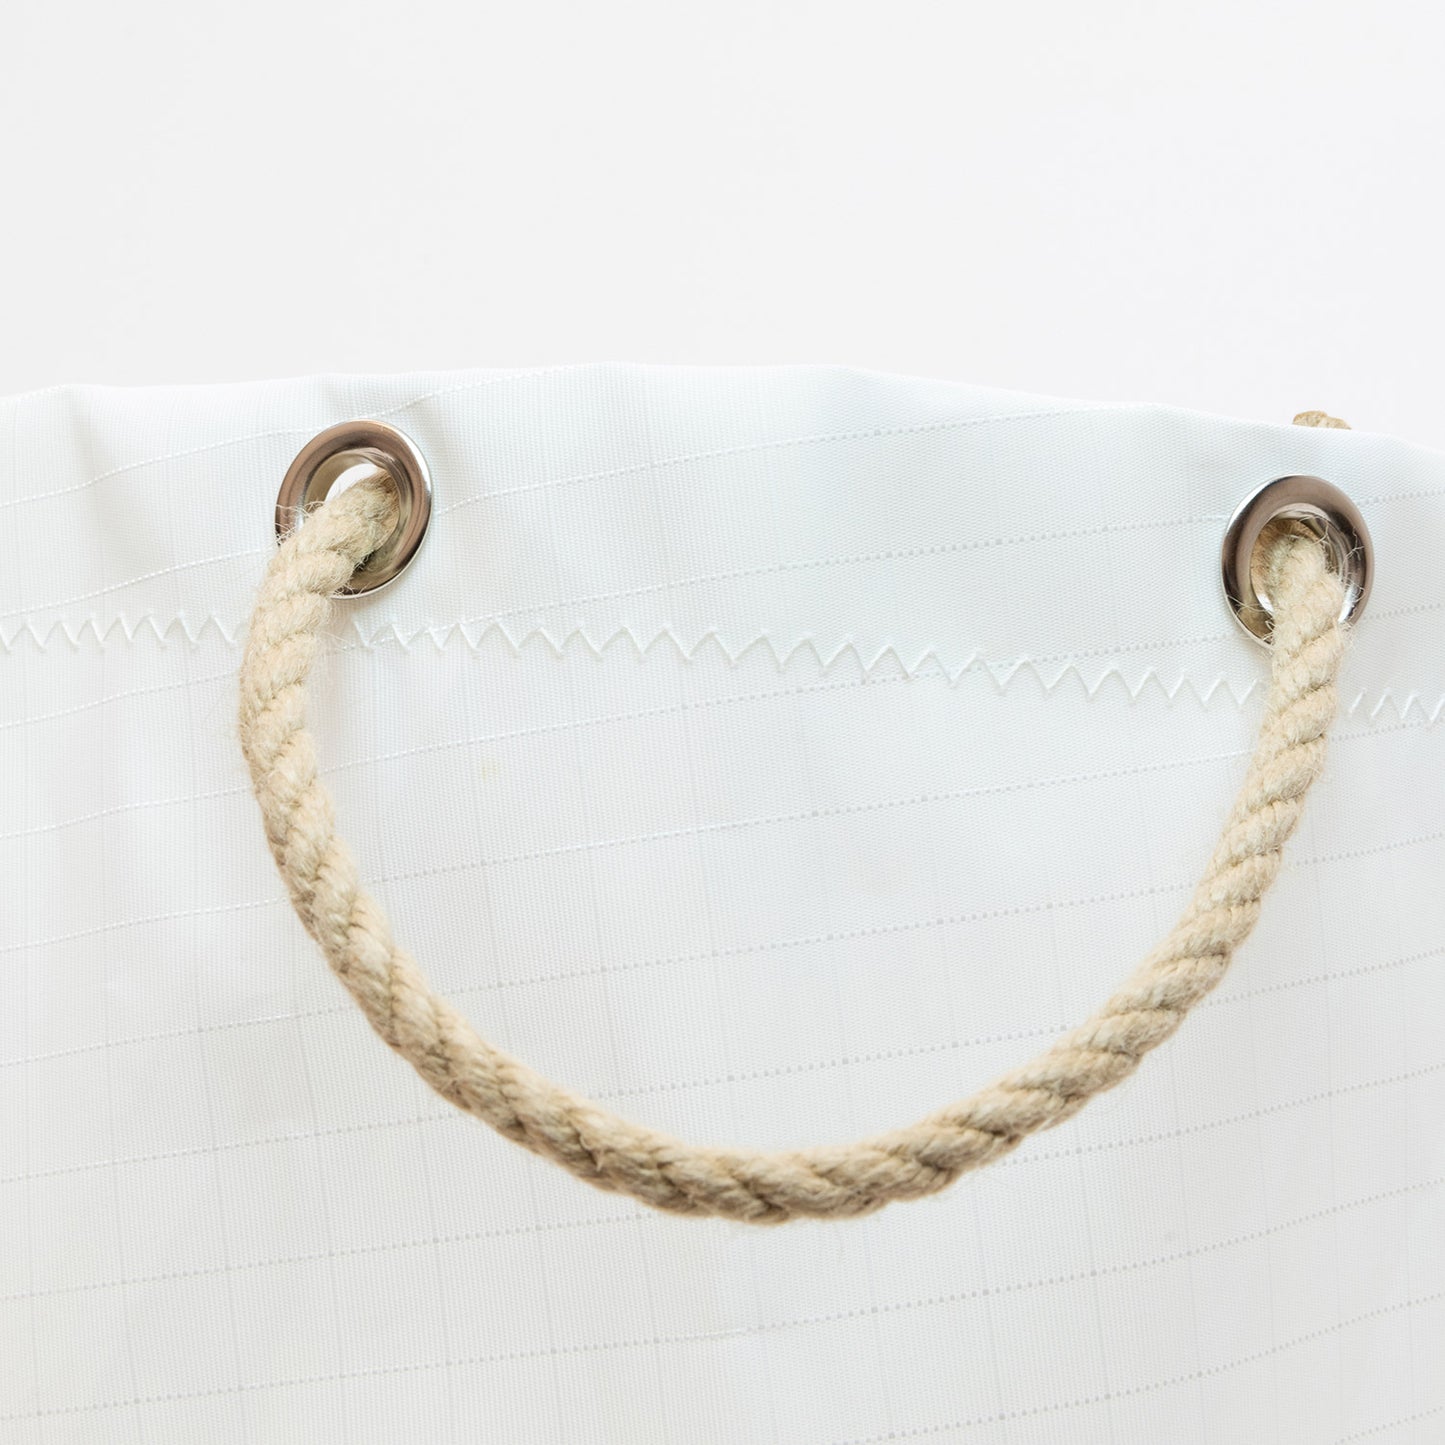 Round bucket bag in white close up of Rope handles.